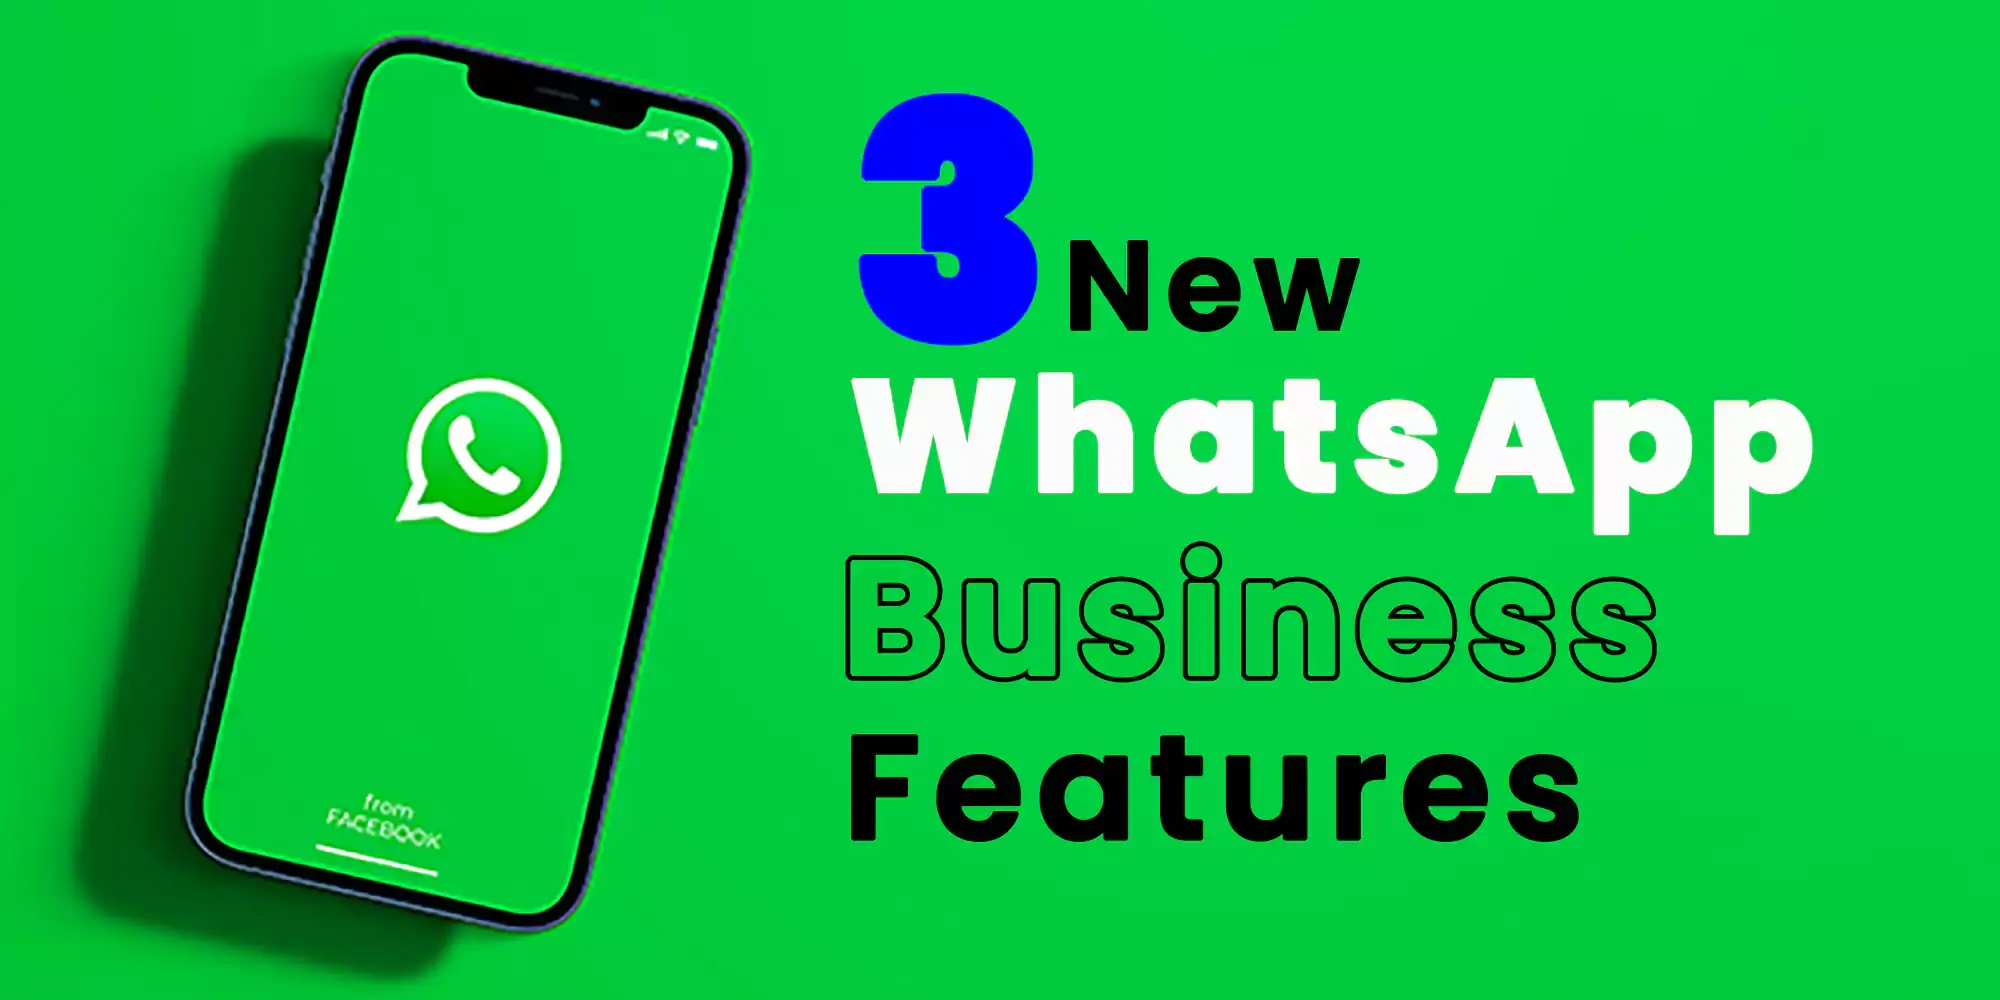 3 New WhatsApp Business Features Need to Know About